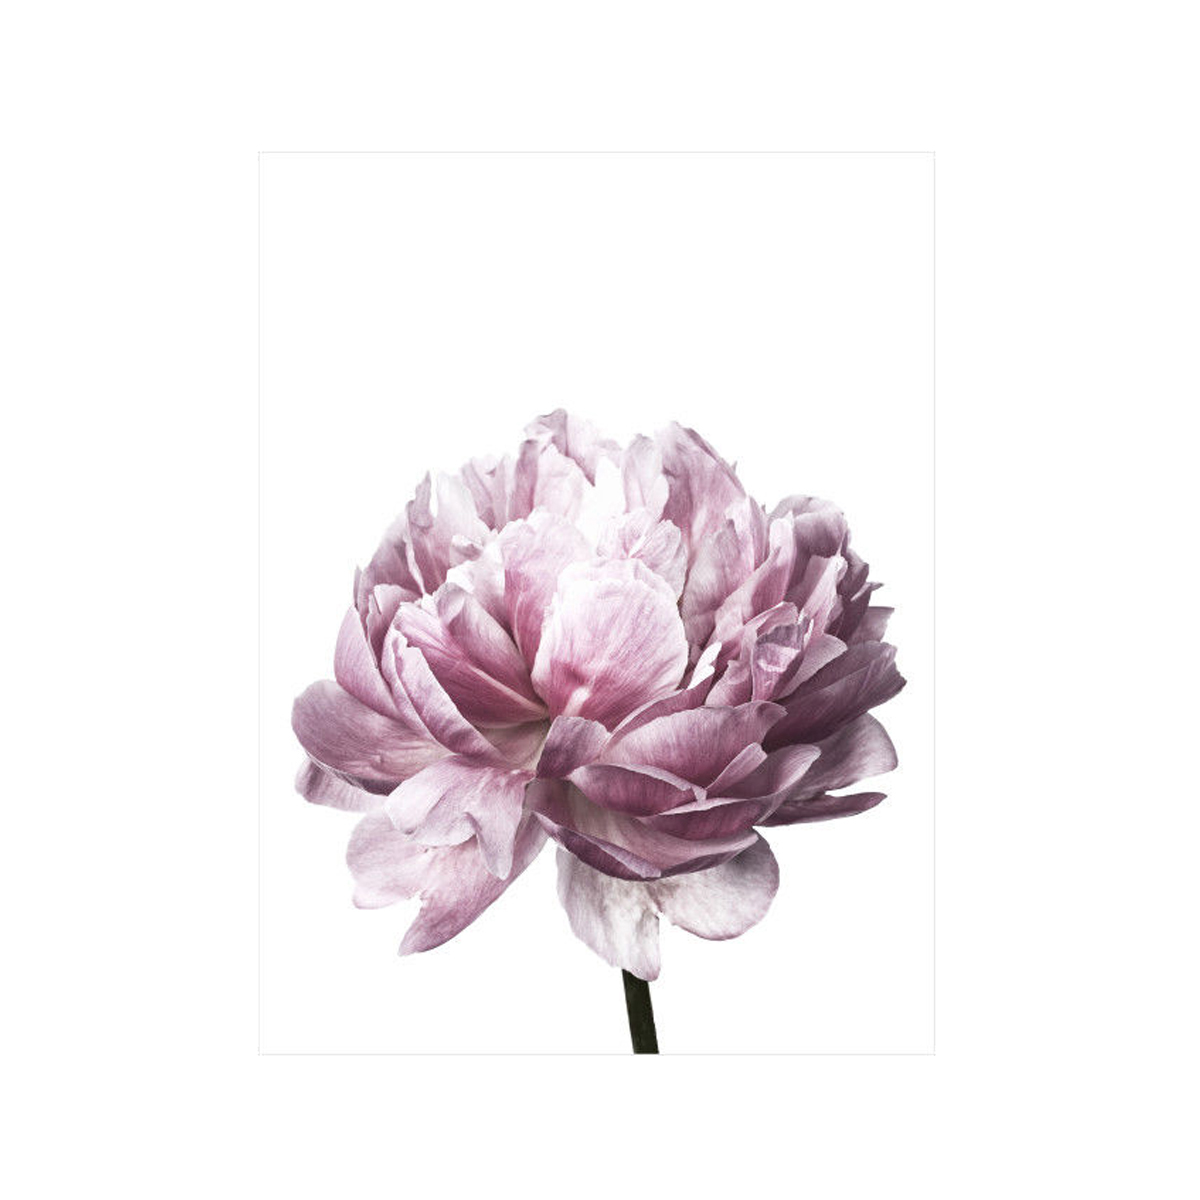 20x3030x40cm-Flower-Modern-Wall-Art-Canvas-Paintings-Picture-Home-Decor-Mural-Poster-with-Frame-1632681-7